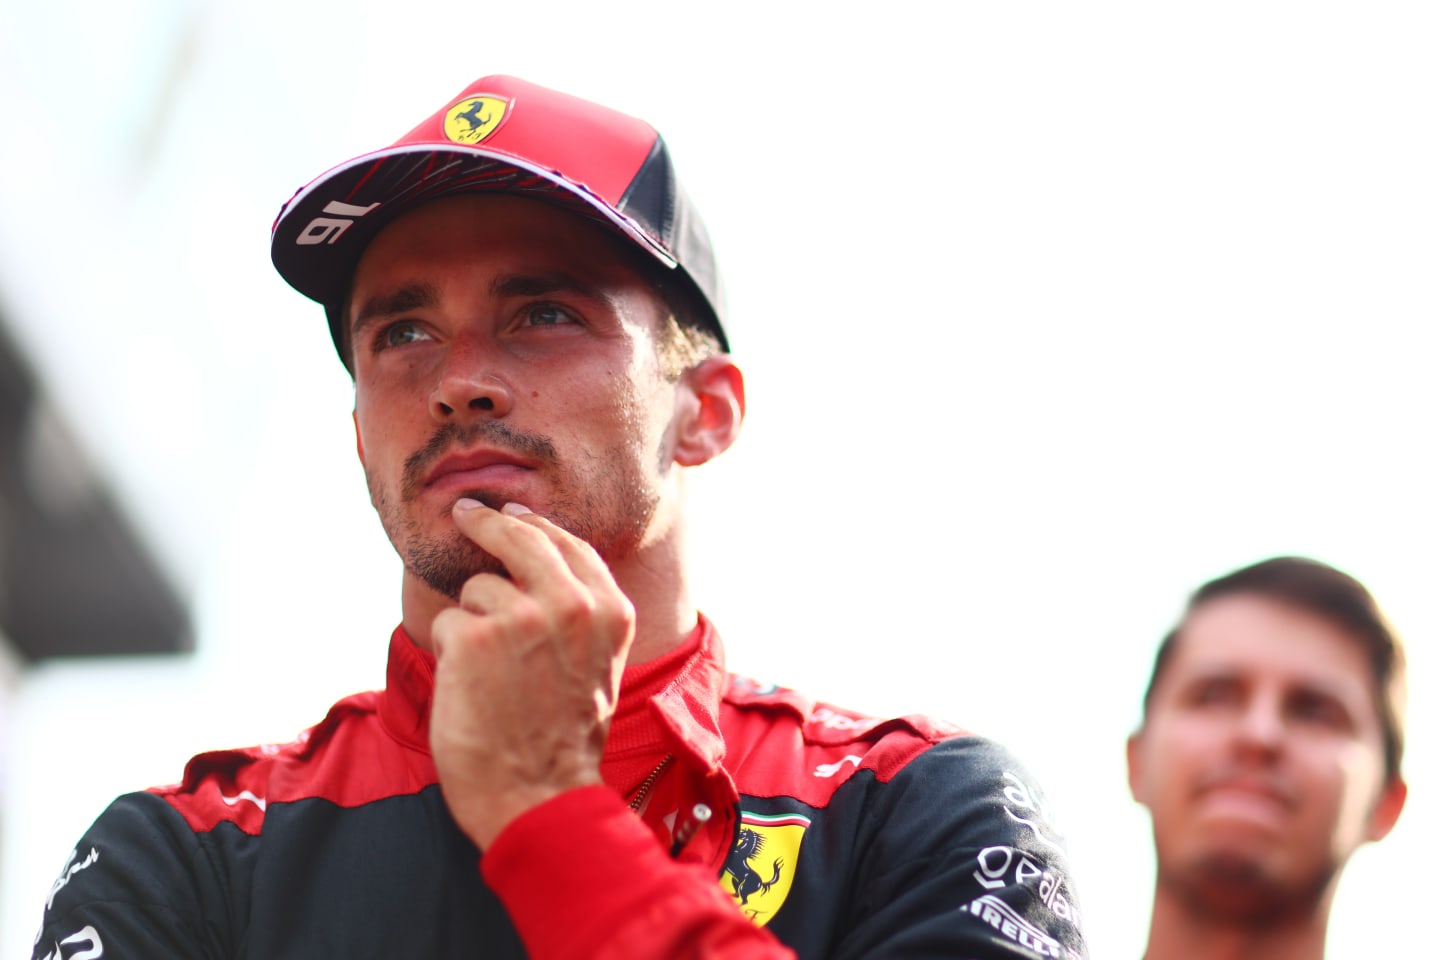 ZANDVOORT, NETHERLANDS - SEPTEMBER 04: Third placed Charles Leclerc of Monaco and Ferrari looks on in parc ferme during the F1 Grand Prix of The Netherlands at Circuit Zandvoort on September 04, 2022 in Zandvoort, Netherlands. (Photo by Dan Istitene - Formula 1/Formula 1 via Getty Images)